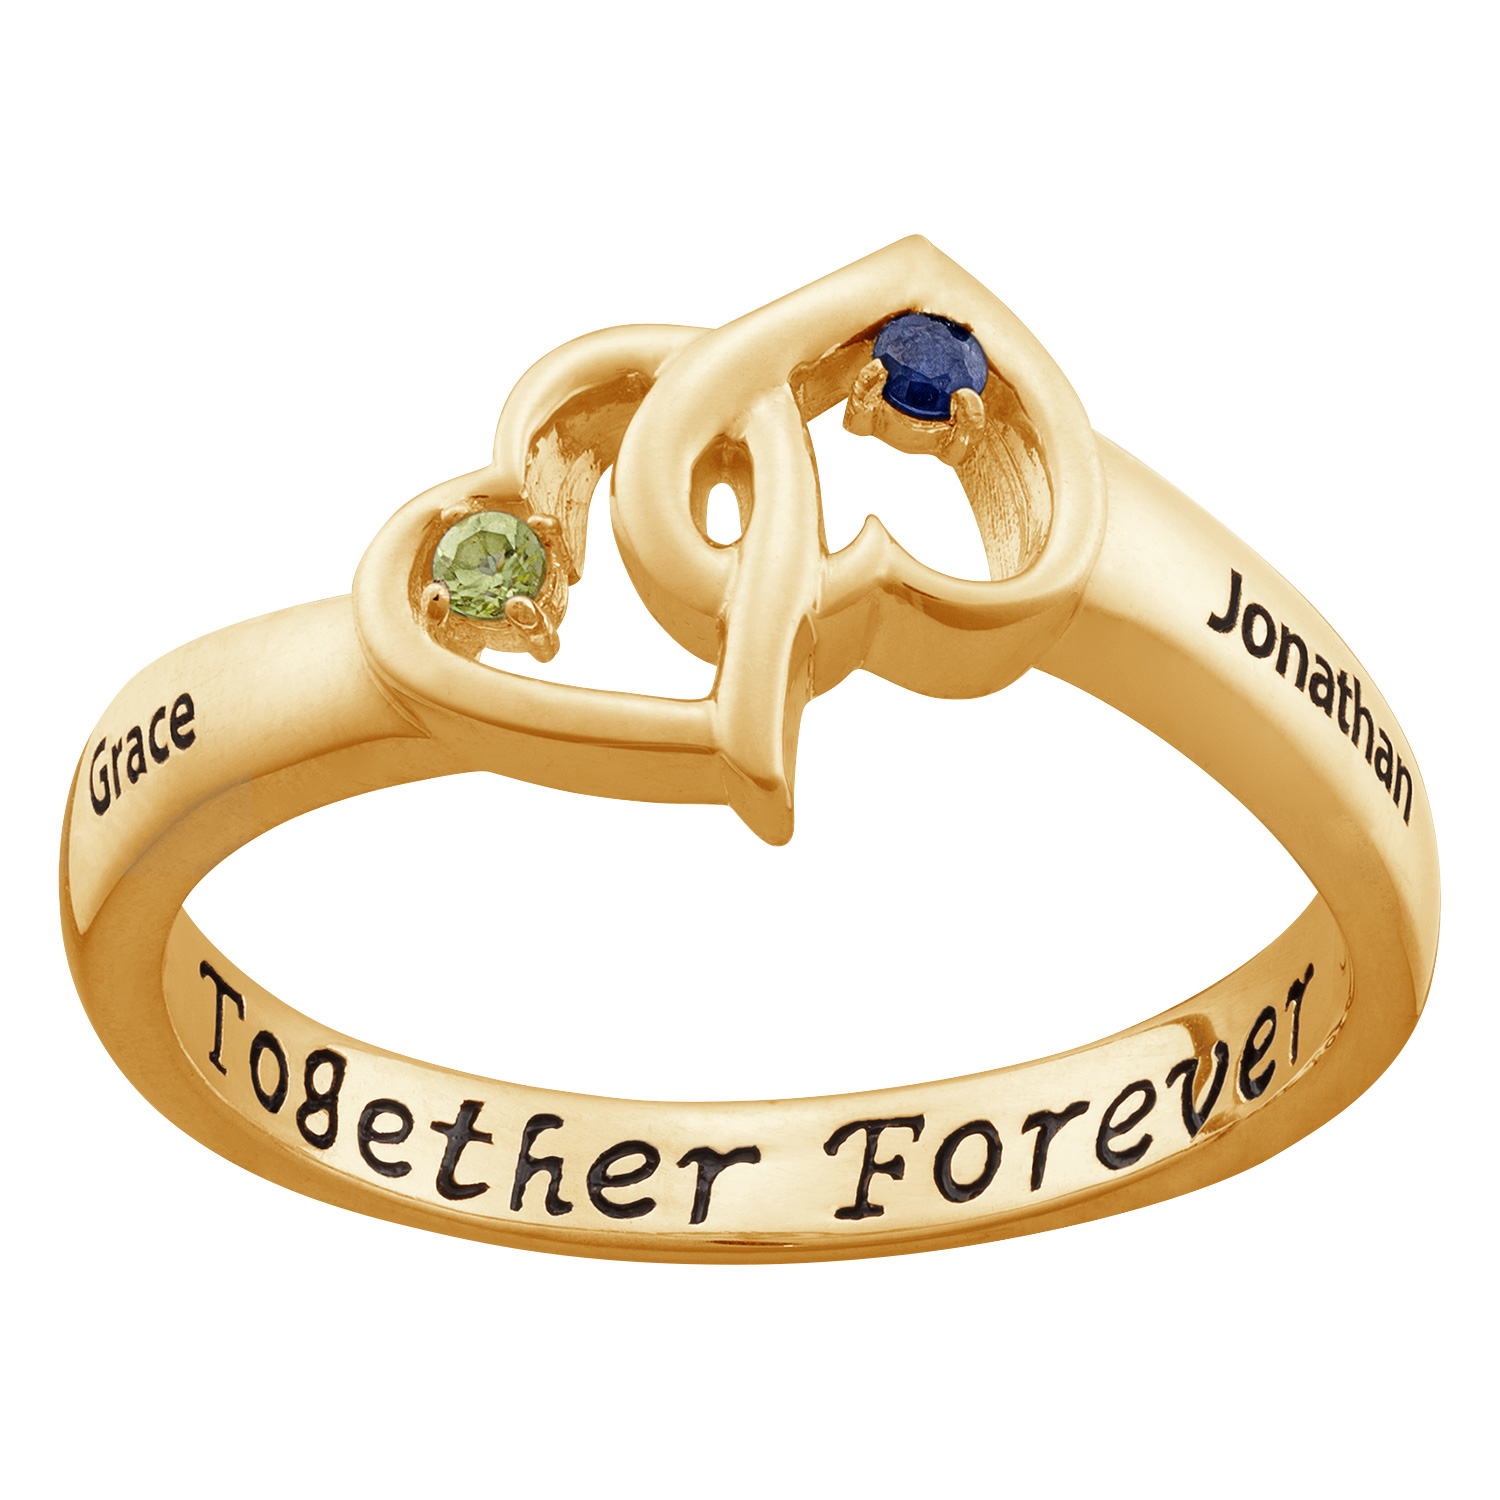 14K Gold over Sterling Entwined Hearts Birthstone & Name Ring